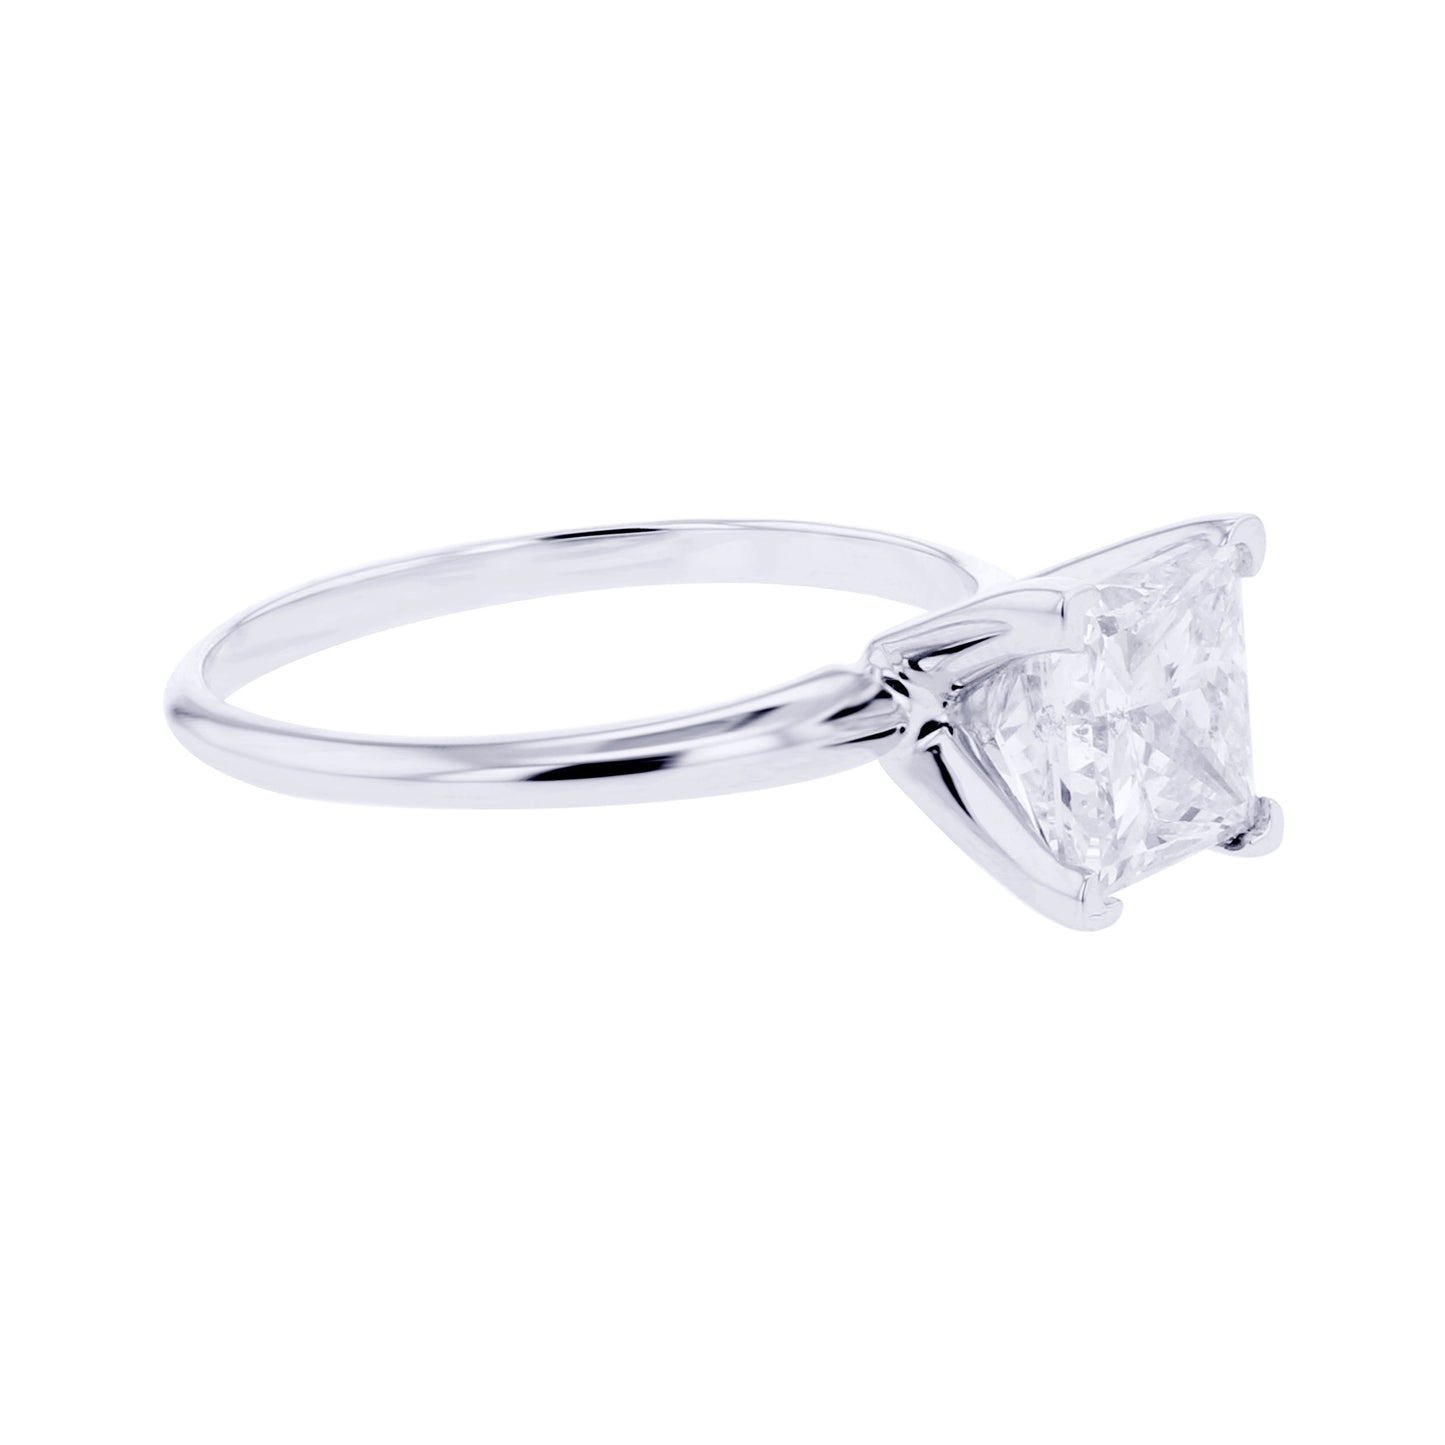 Classic Princess Solitaire Ready for Love Diamond Engagement Ring 2ct